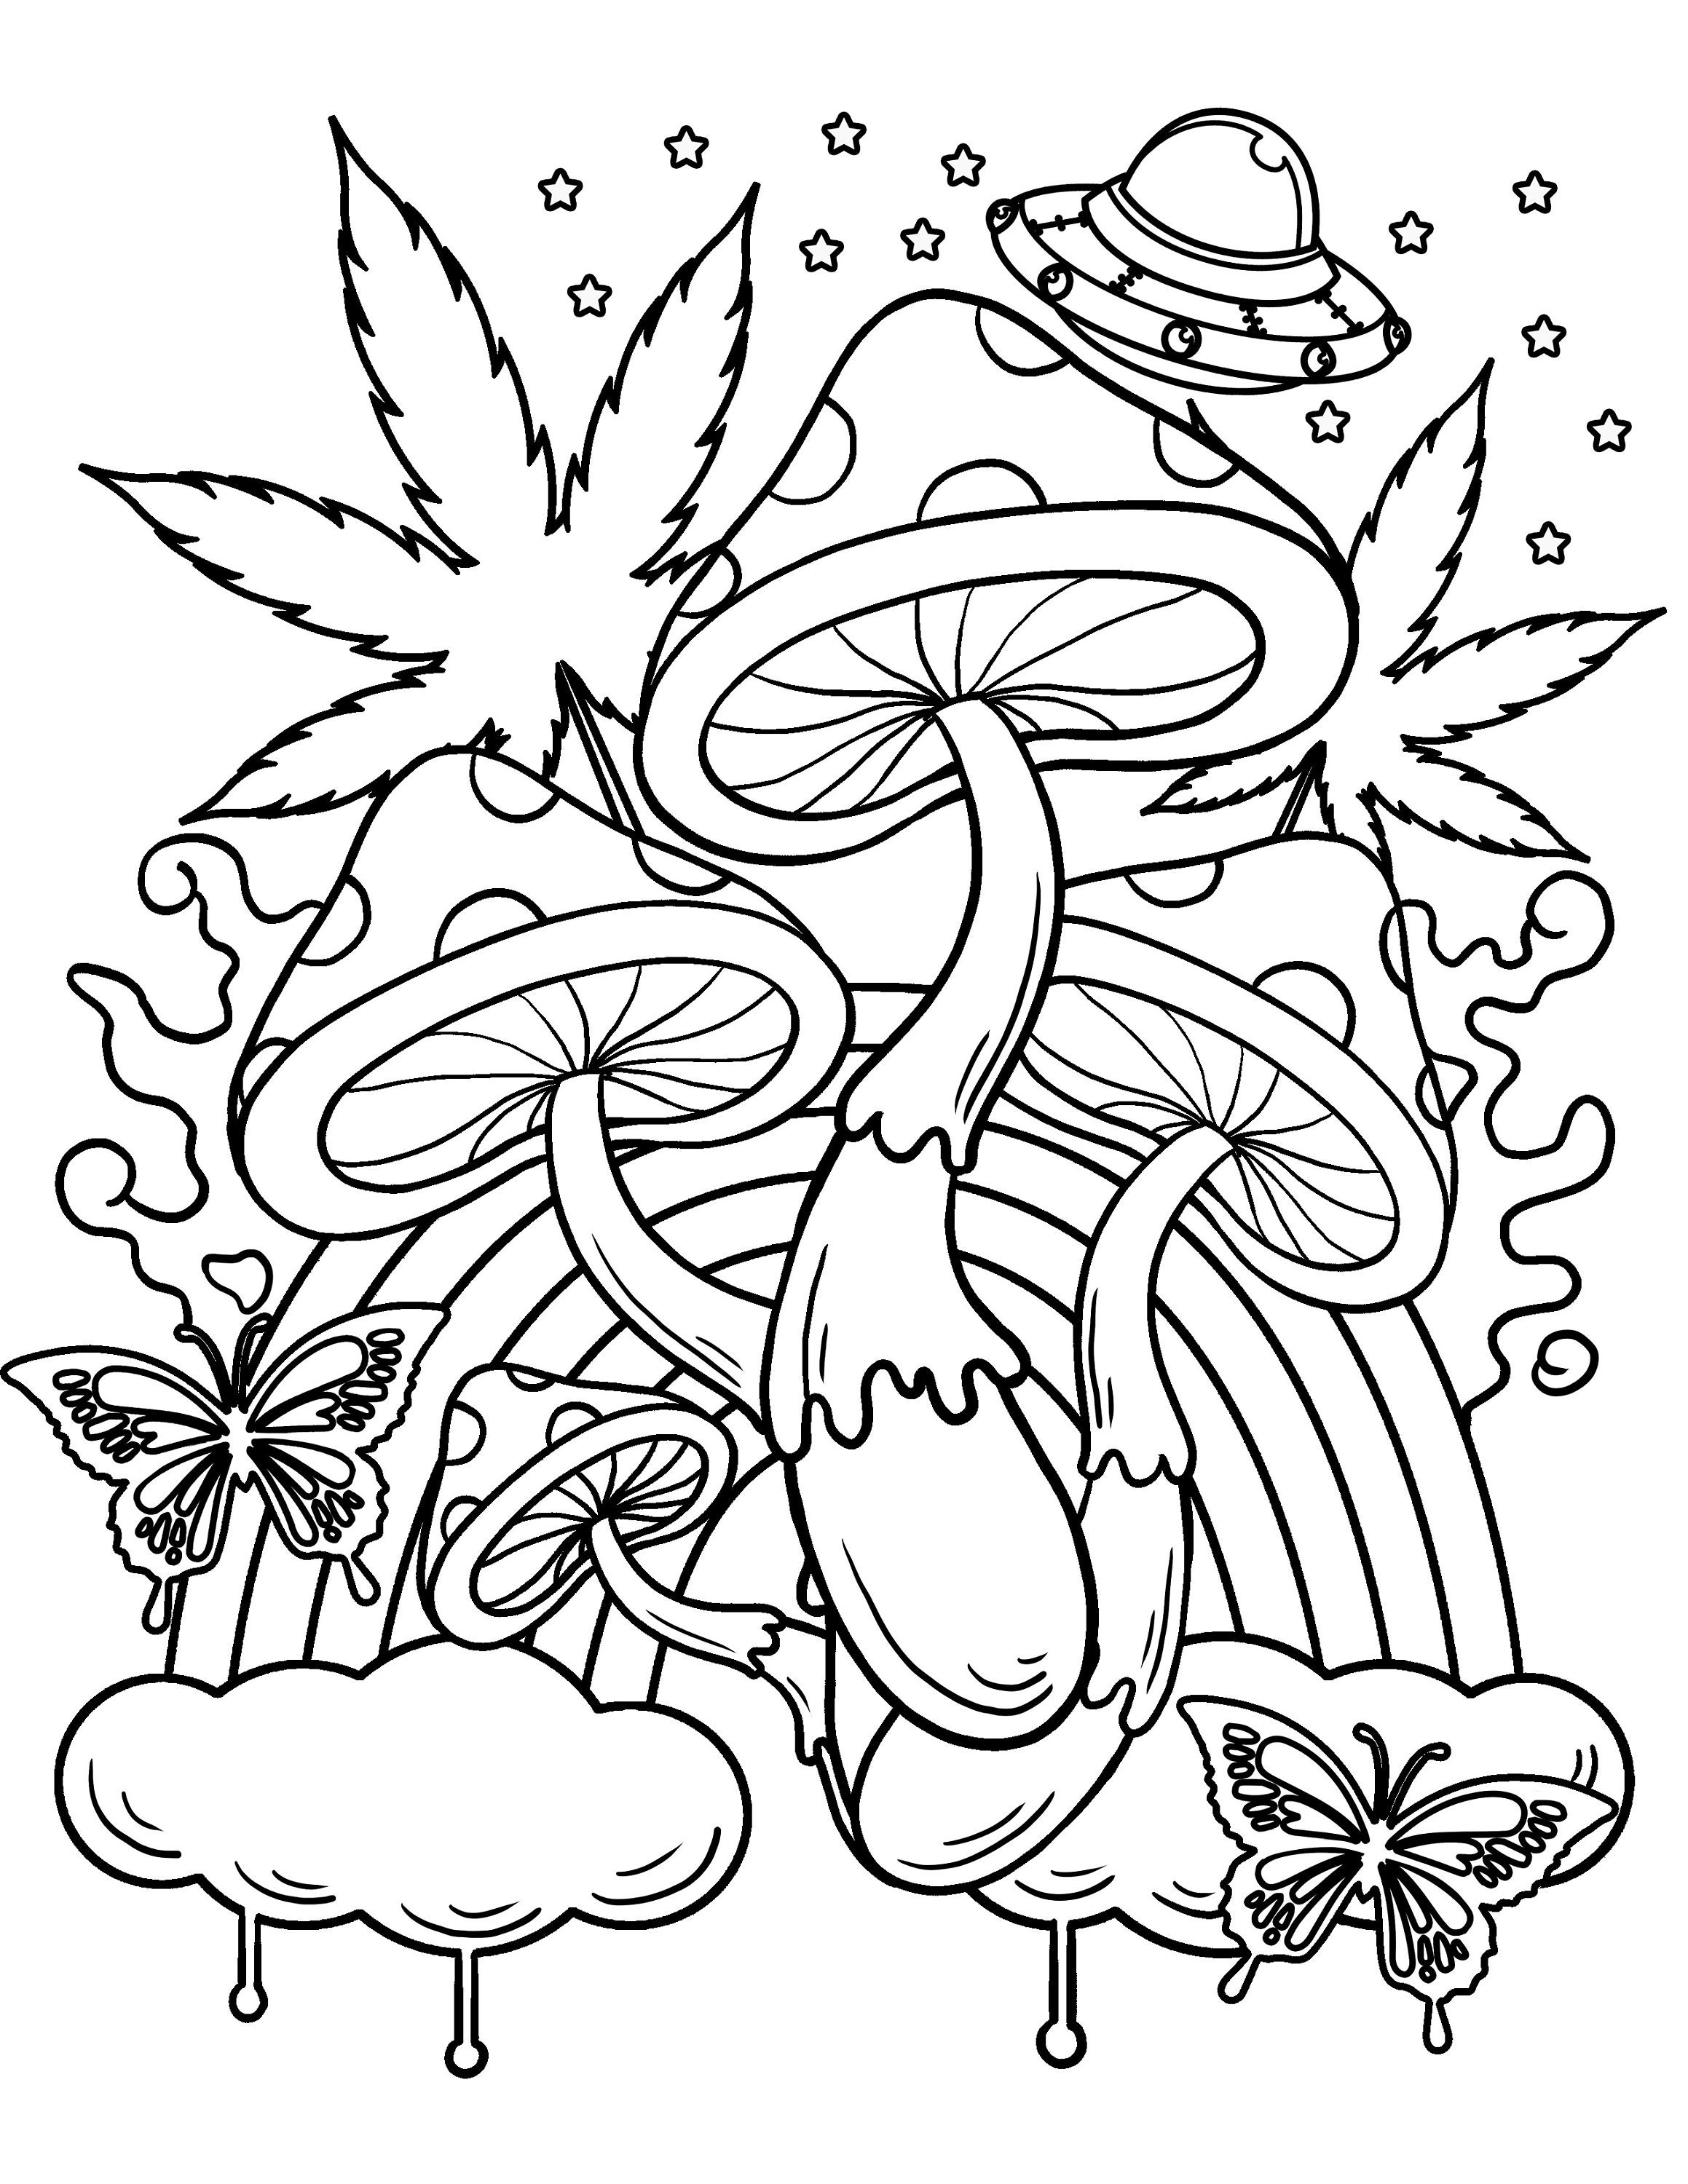 Trippy Coloring Pages Mushrooms Nutritional Value